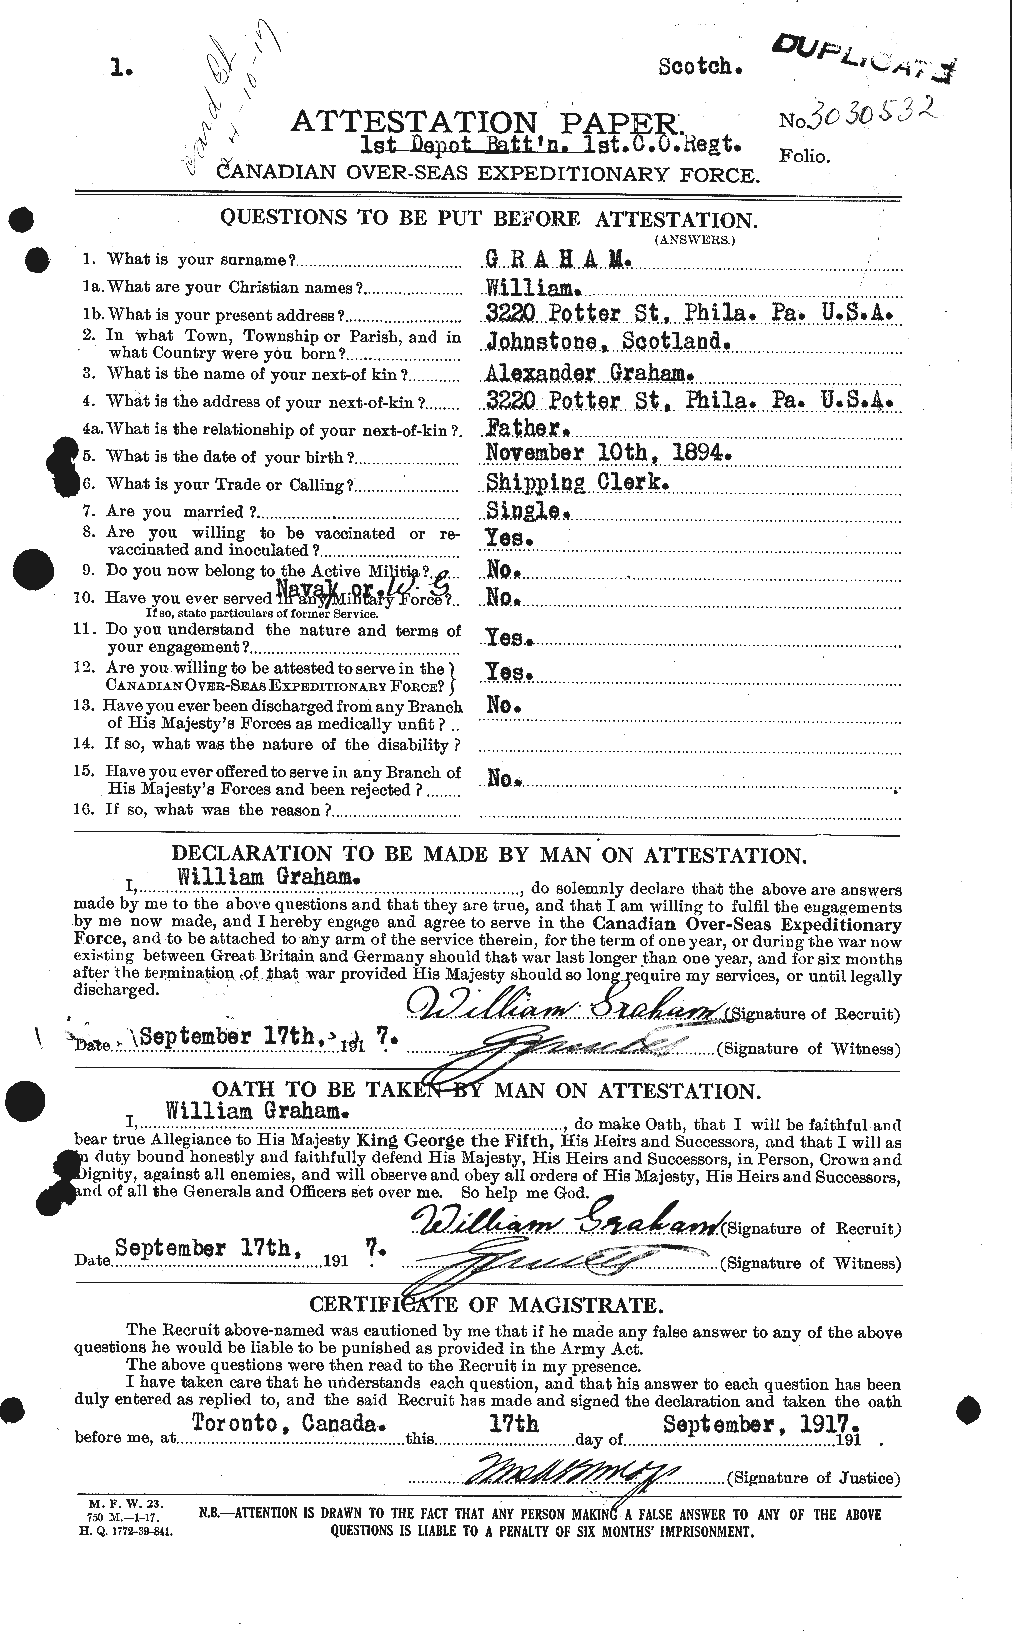 Personnel Records of the First World War - CEF 362694a